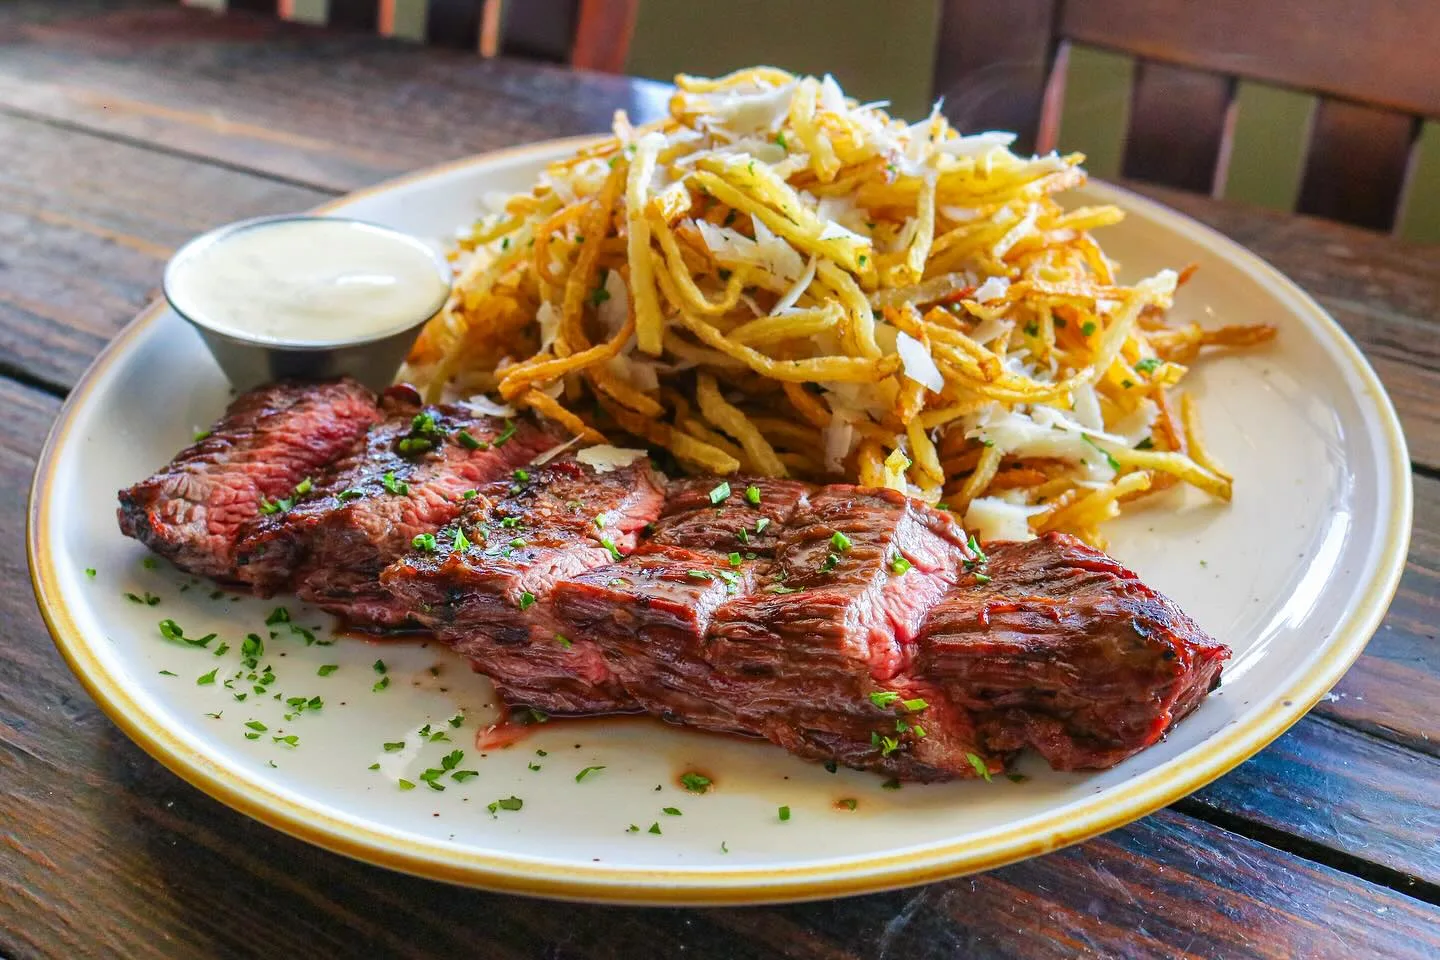 steak frites with shoestring fries at the plaid apron in knoxville tn as a great place for dinner on new years eve